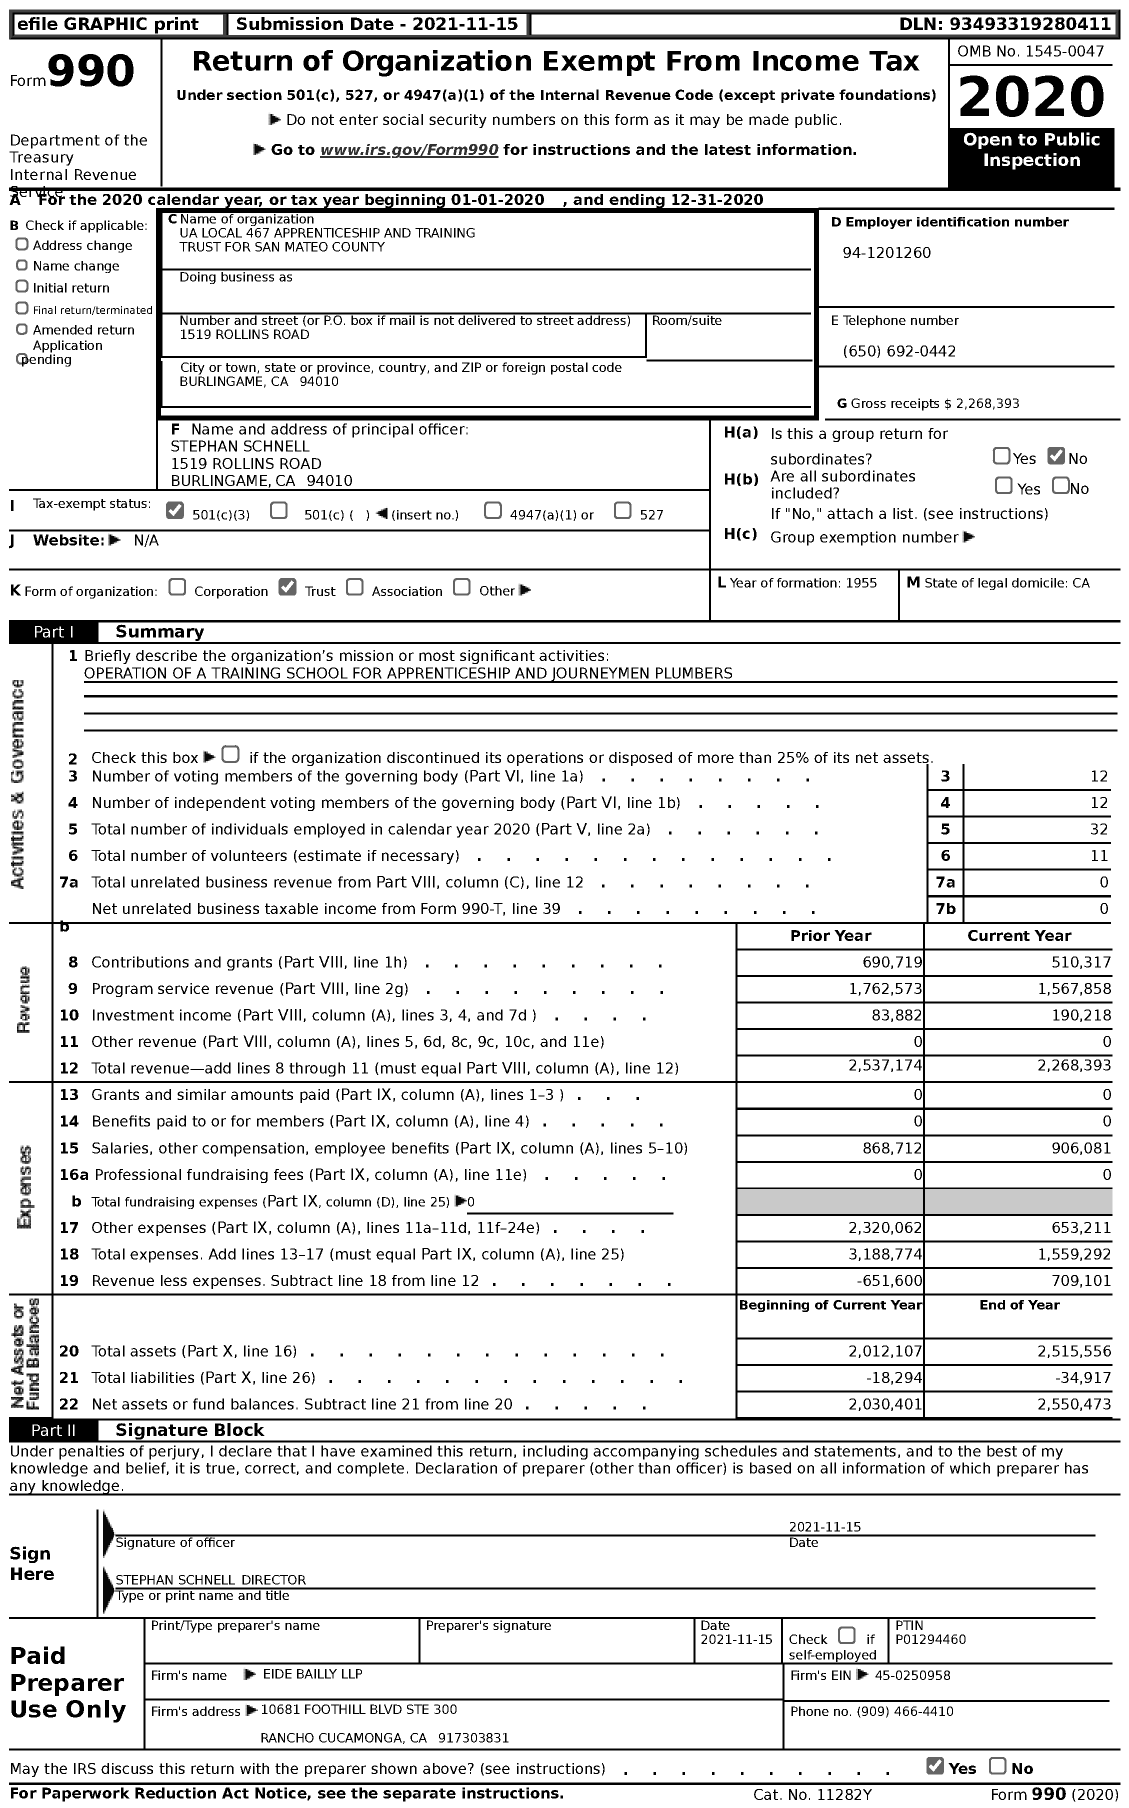 Image of first page of 2020 Form 990 for Ua Local 467 Apprenticeship and Training Trust for San Mateo County